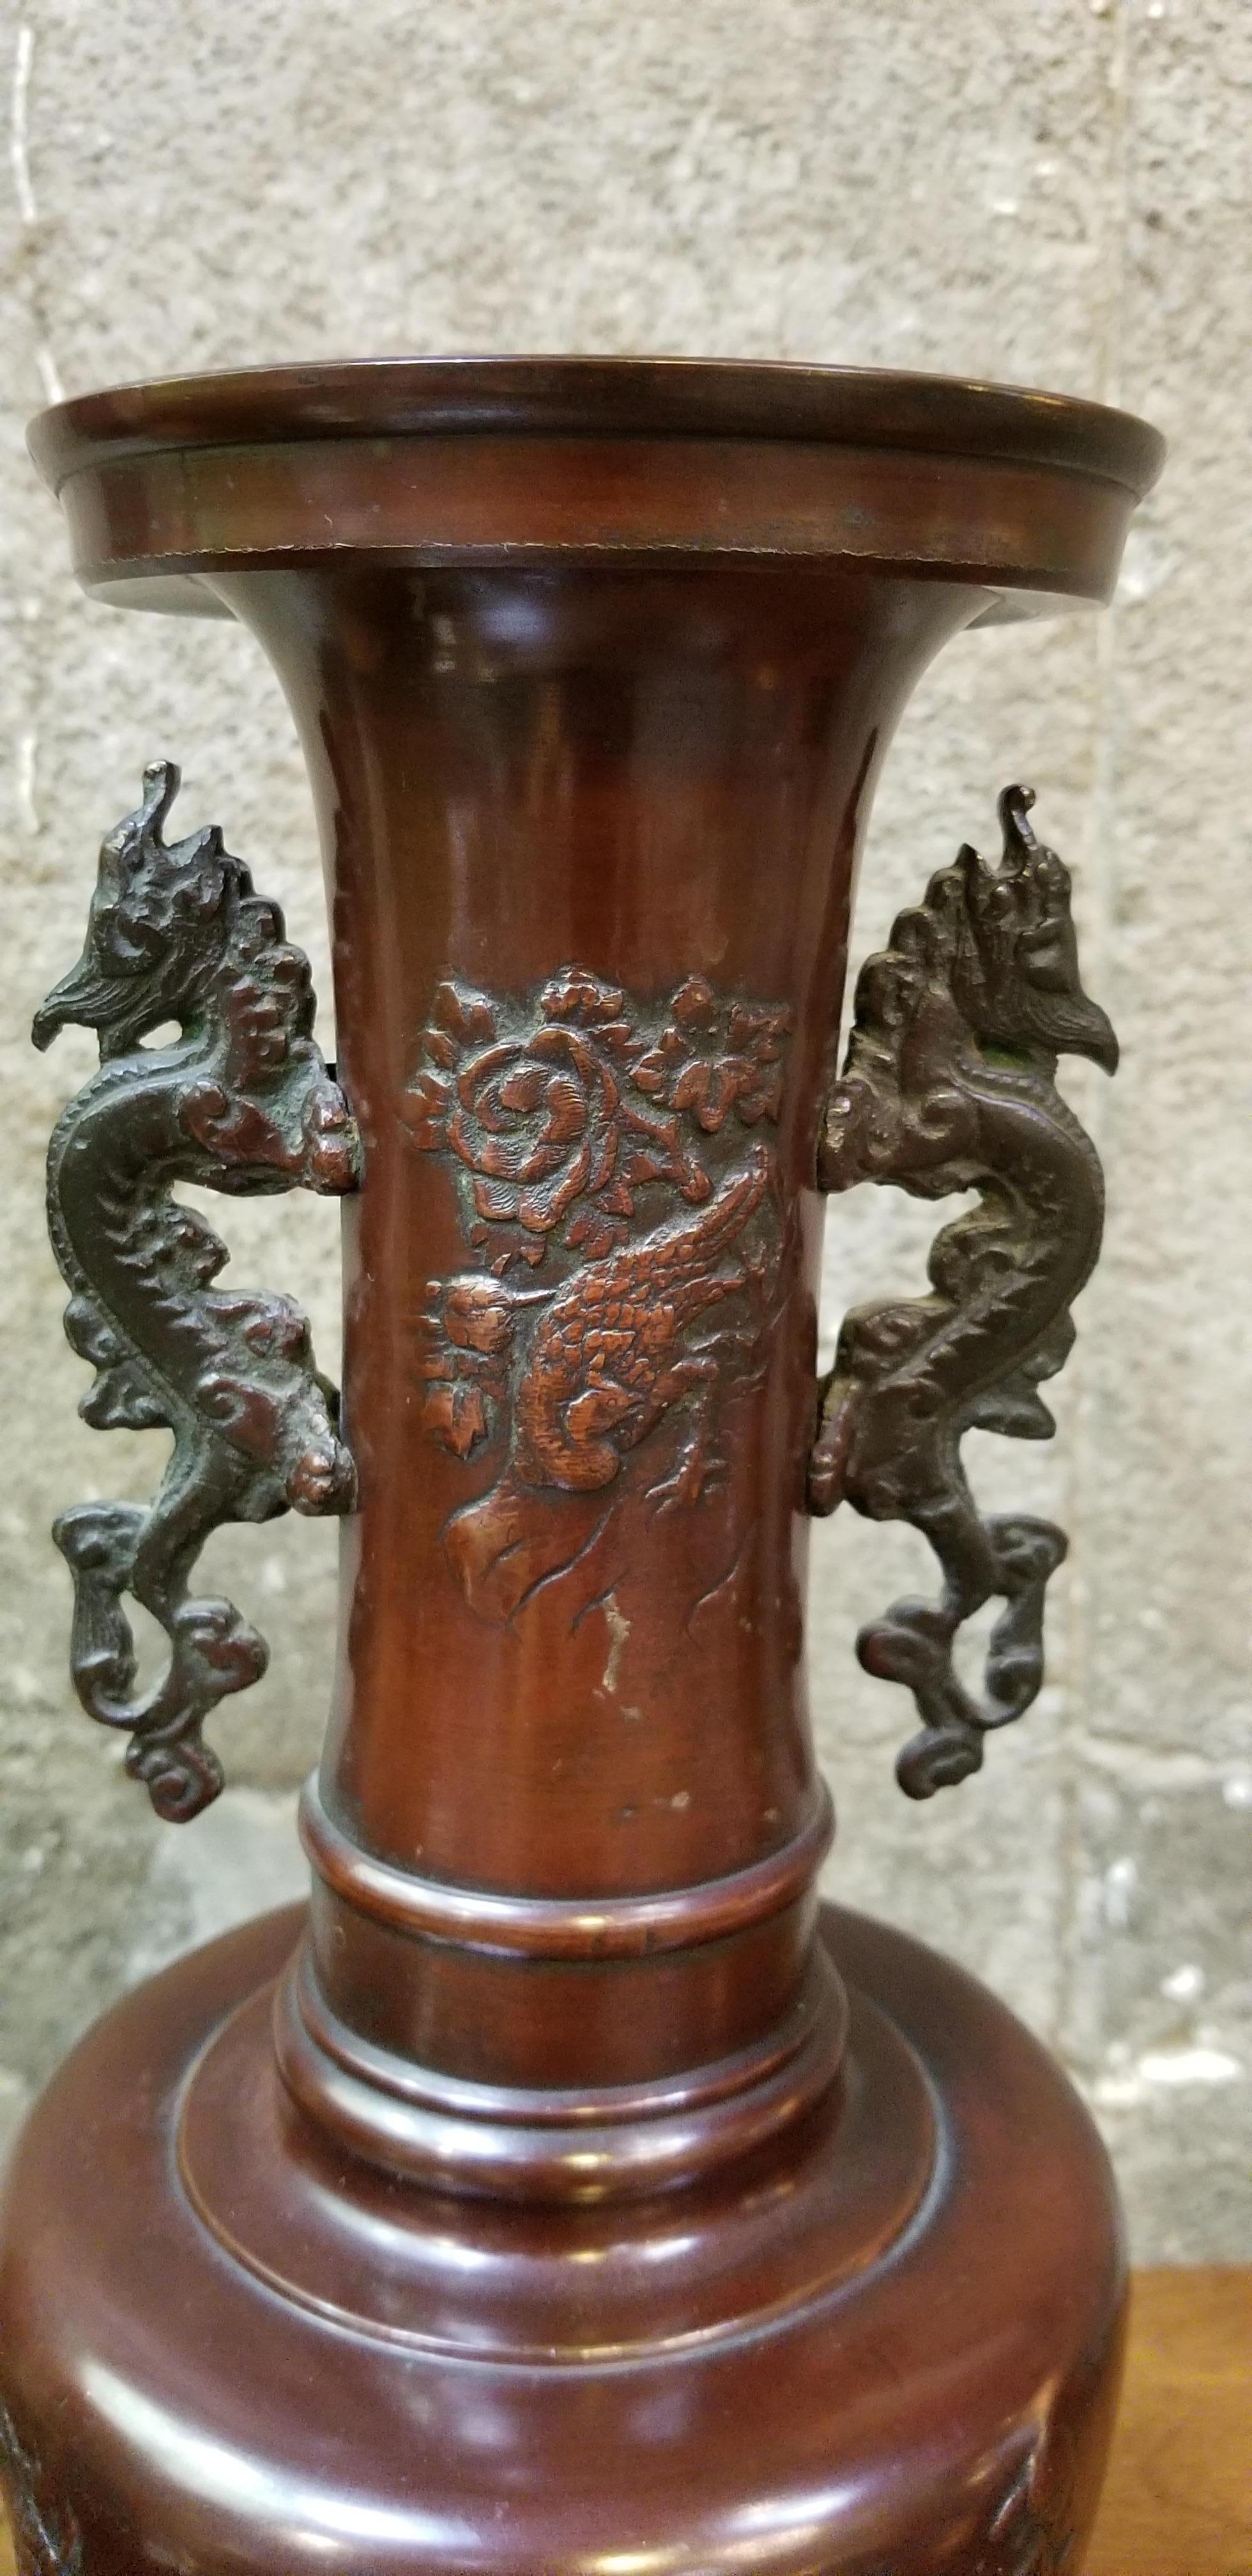 A mid-20th century Japanese bronze vase. Excellent vintage condition. Measures: 15 inches tall.